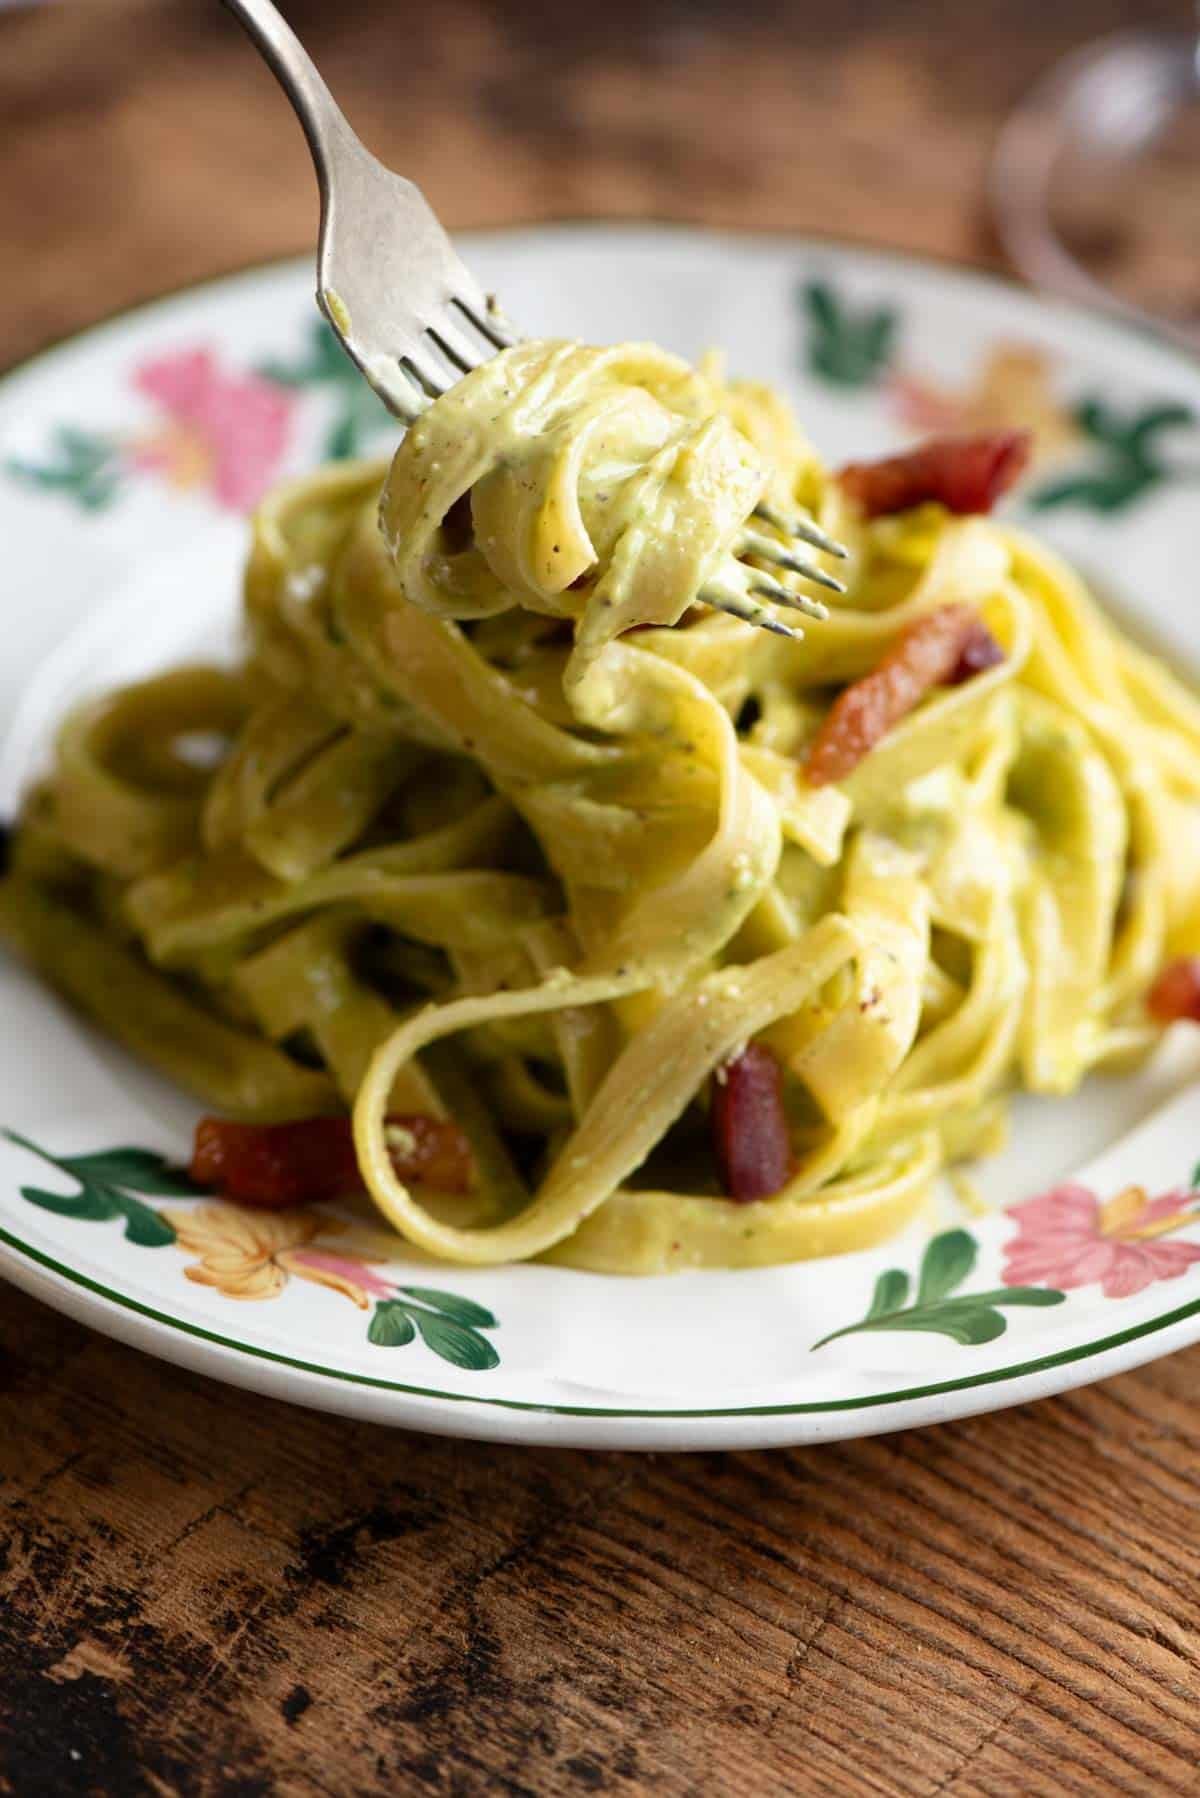 A fork picking up some tagliatelle with pistachio cream sauce from a floral patterned plate.